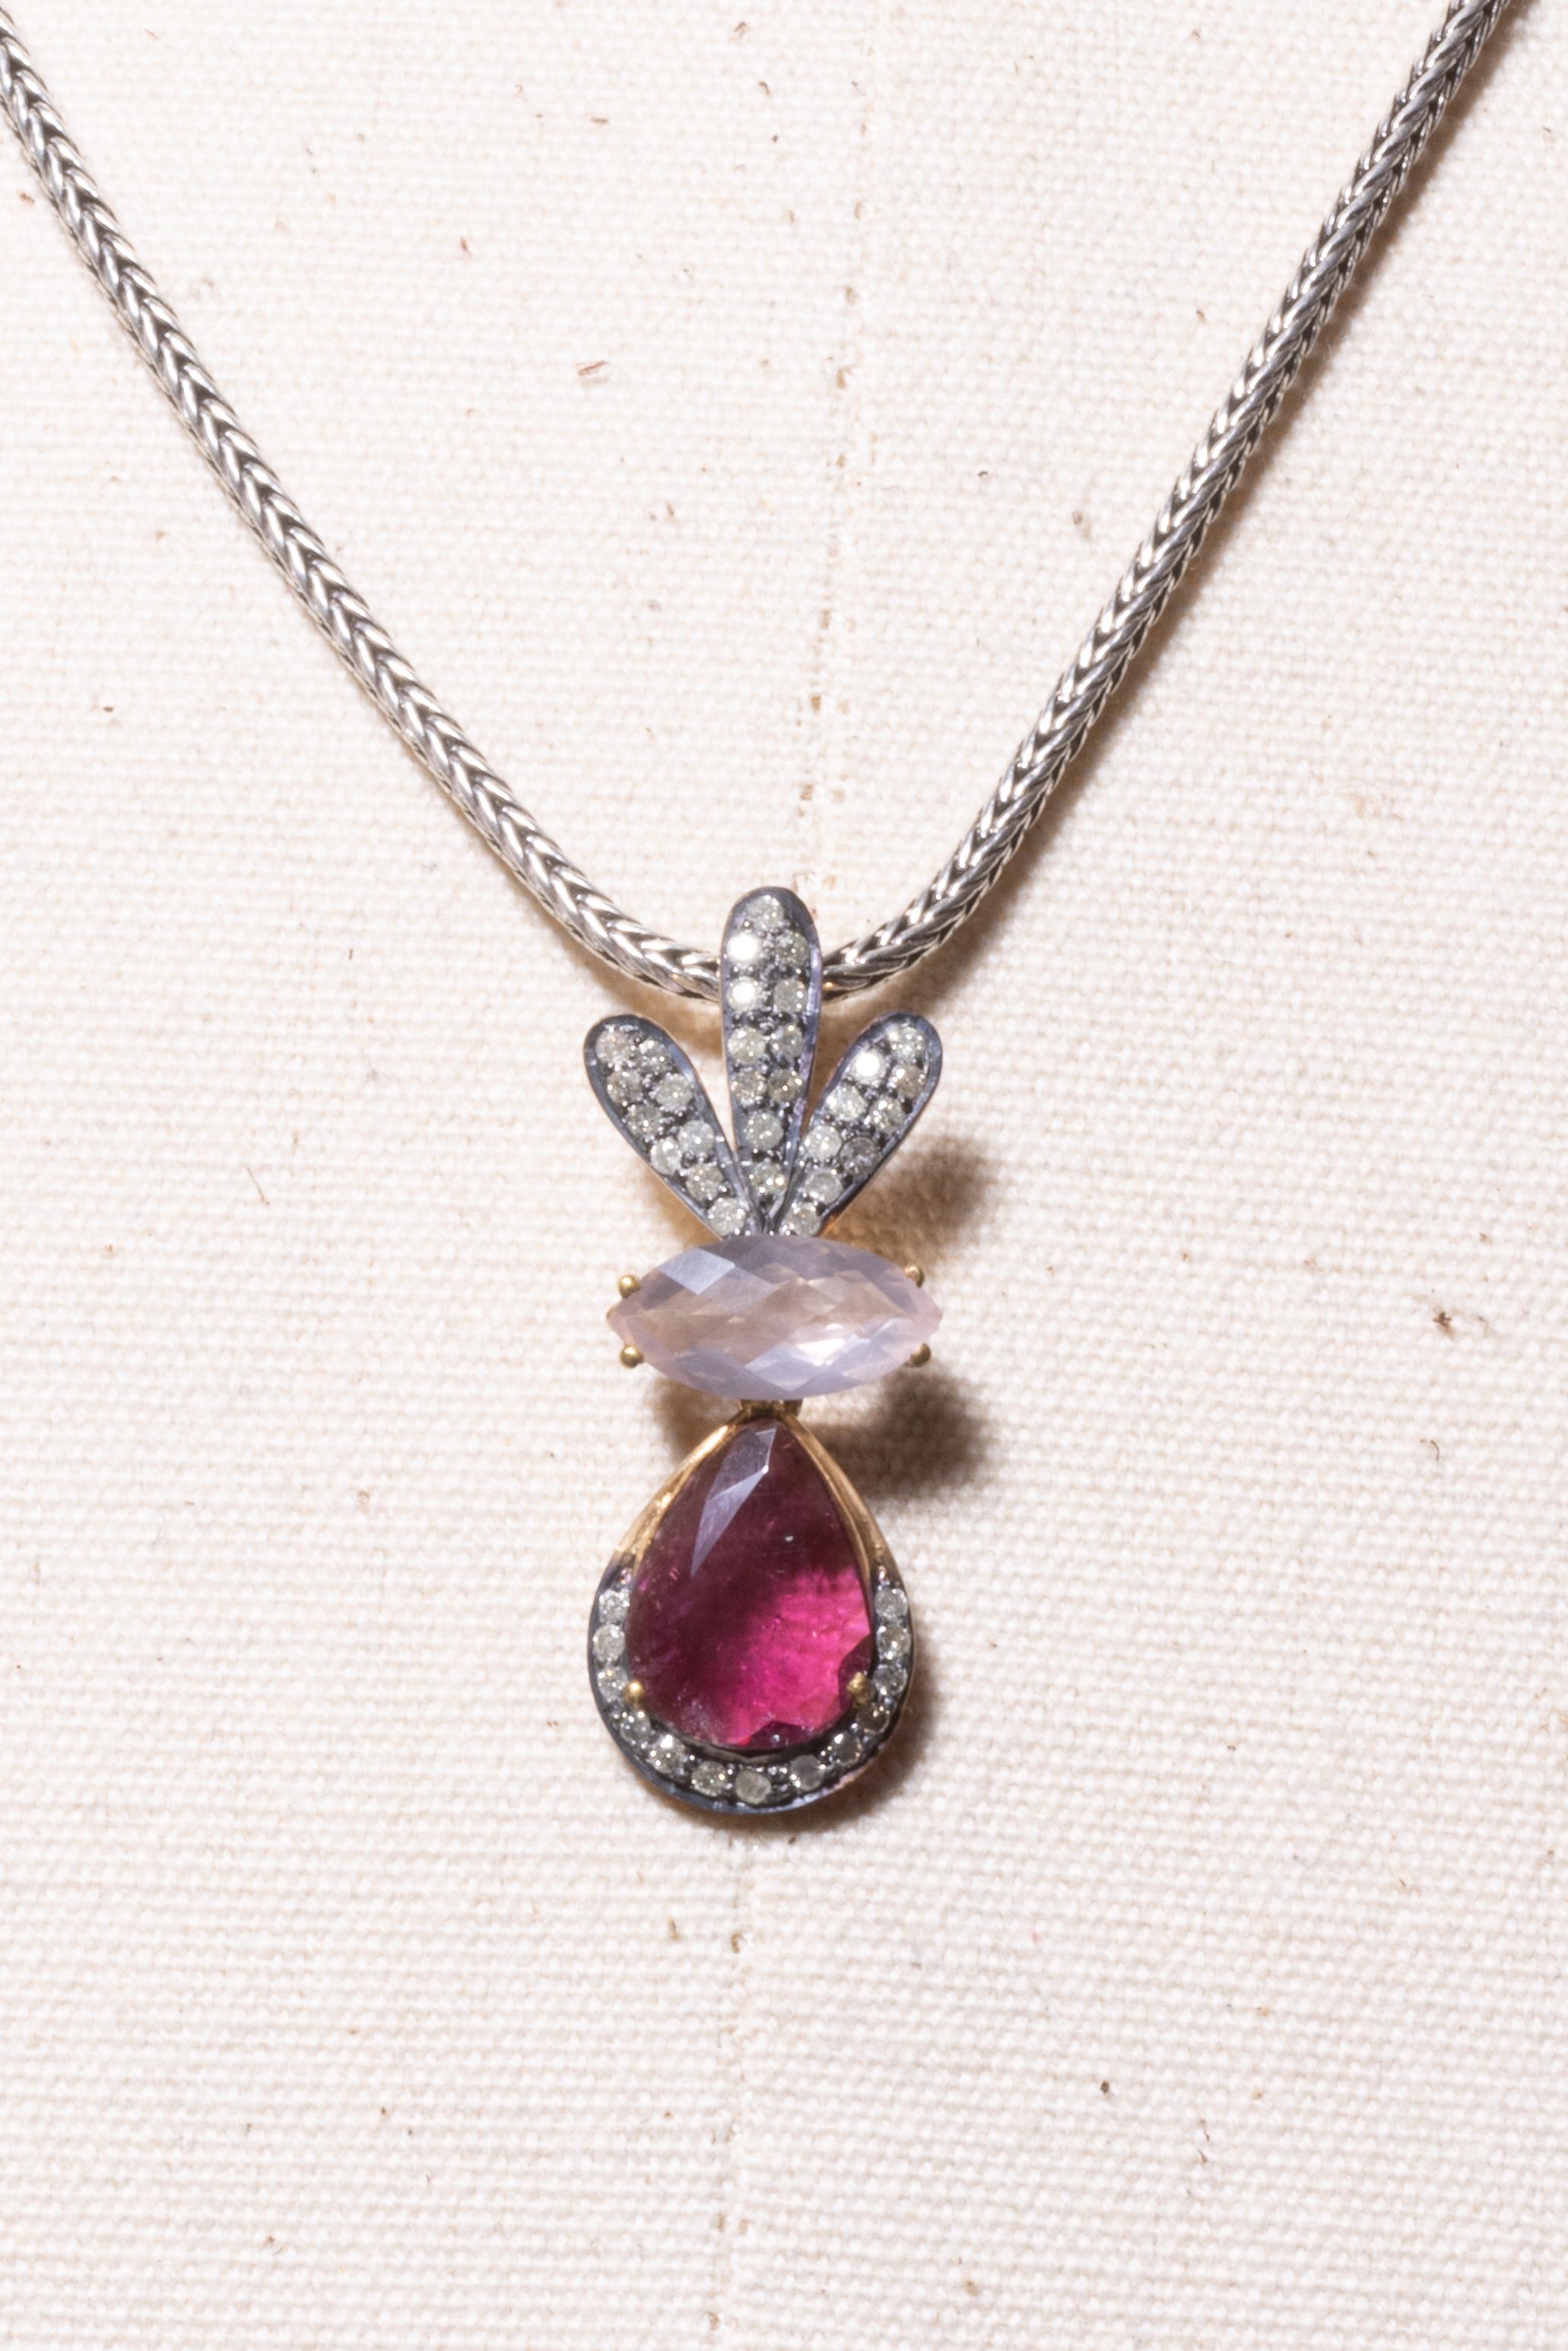 Pendant necklace with a pear-shaped, faceted pink tourmaline gemstone bordered with round, brilliant cut diamonds.  A marquise, faceted rose quartz is mounted above and a crown of diamonds above that in a pave` setting.  Set in sterling silver.  The